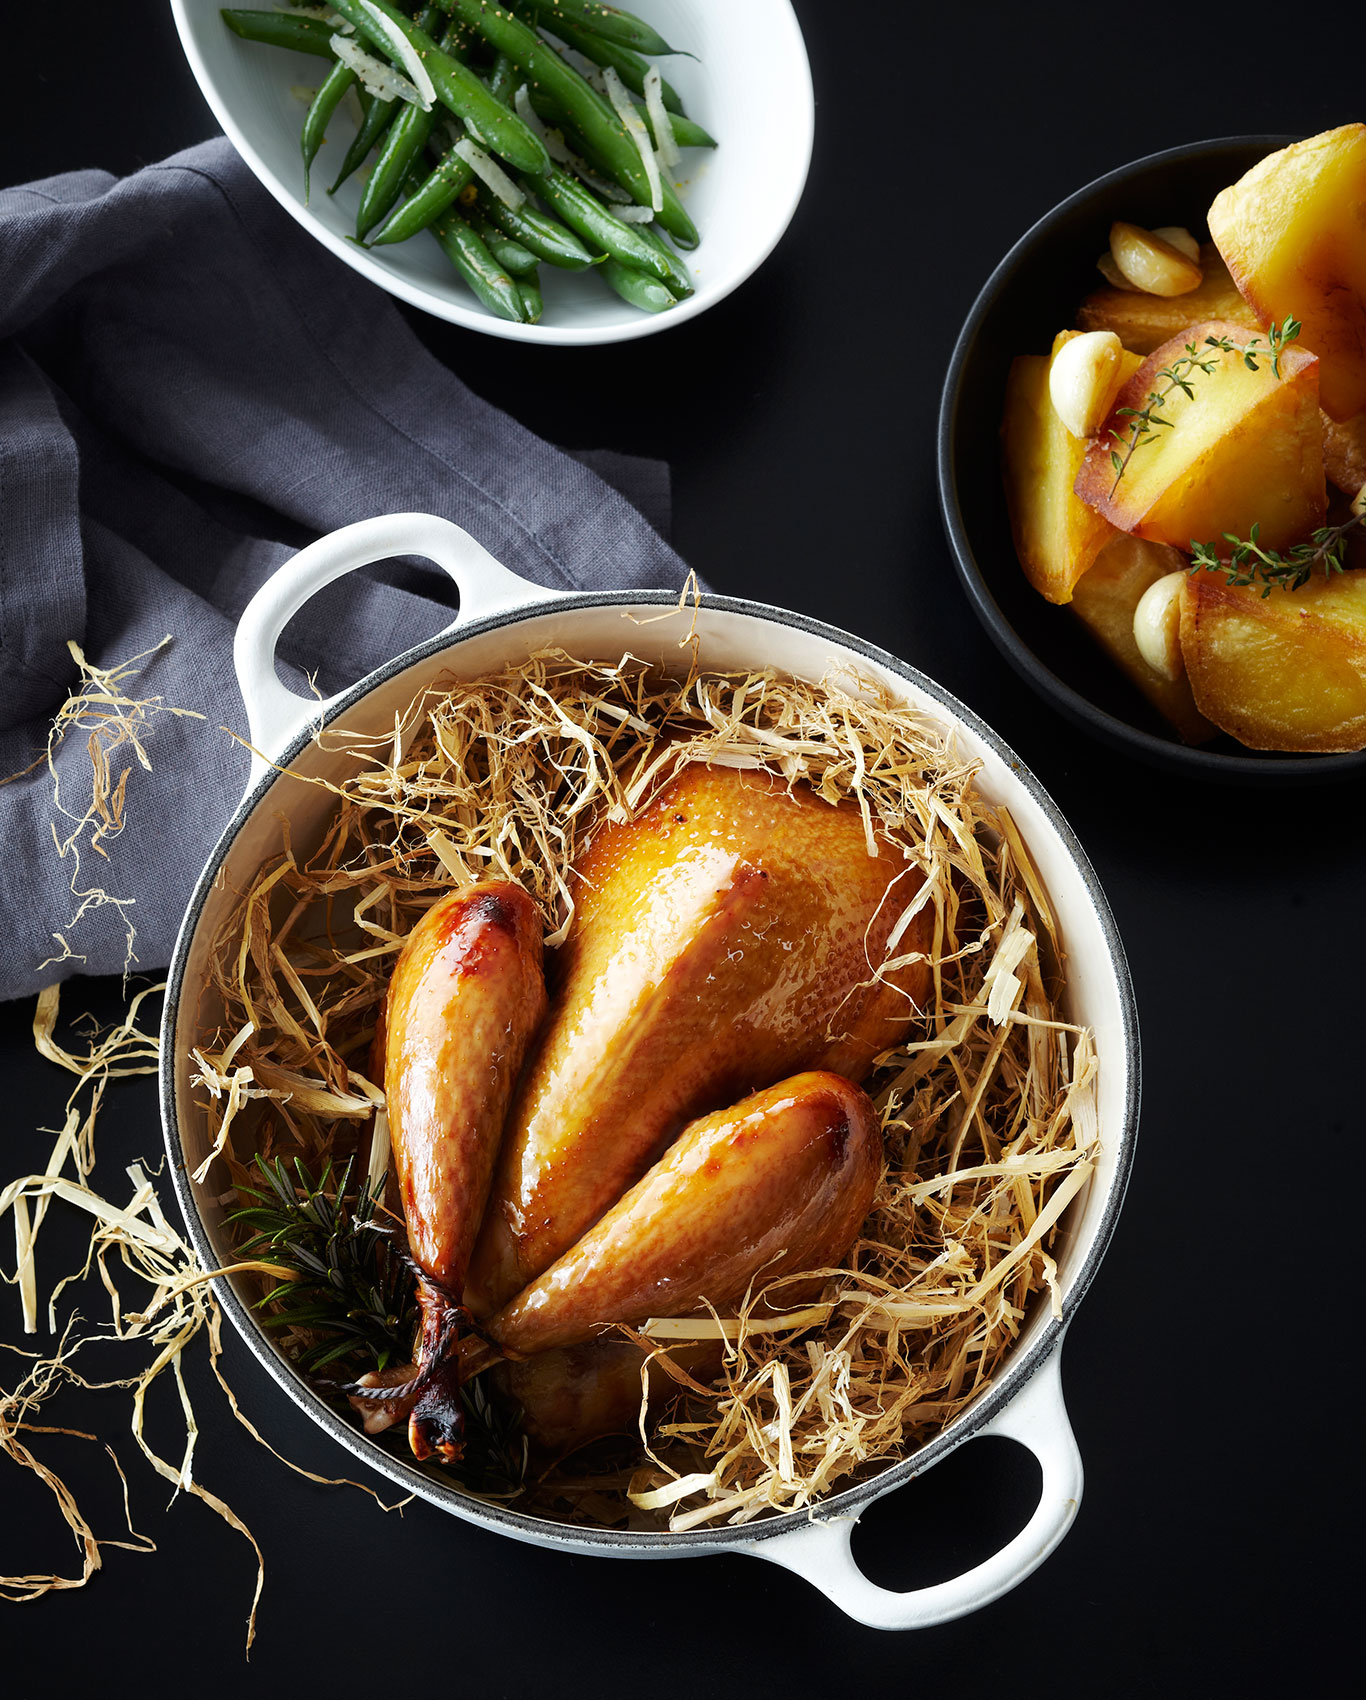 Southon Cooking • The Foodstore Fowl Hay Pheasant in Enamel Stew Pot • Hospitality & Editorial Food Photography